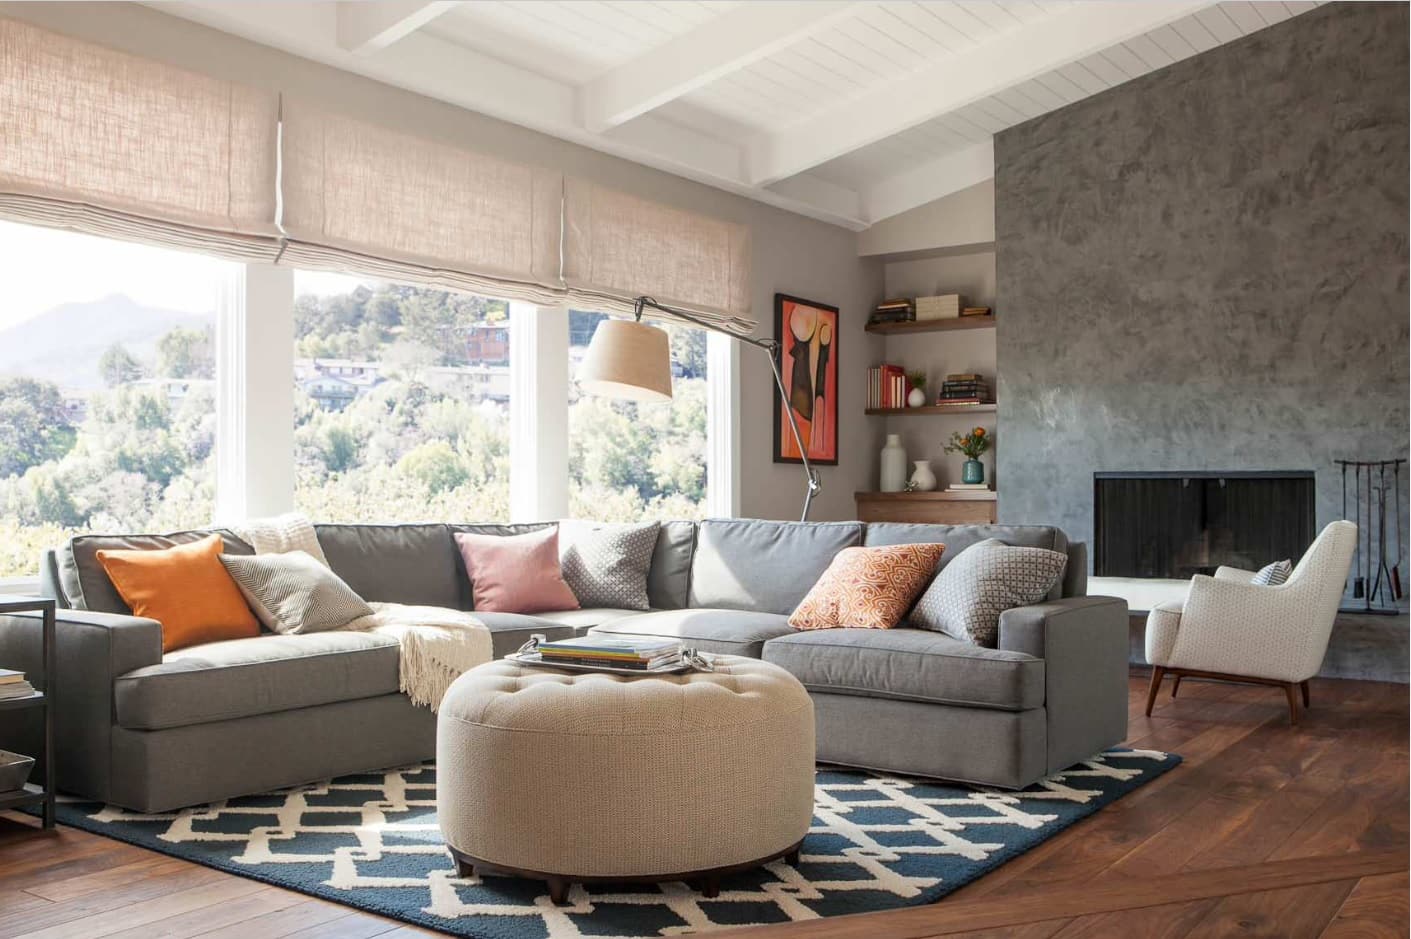 Casual interior with upholstered ottoman as coffee table